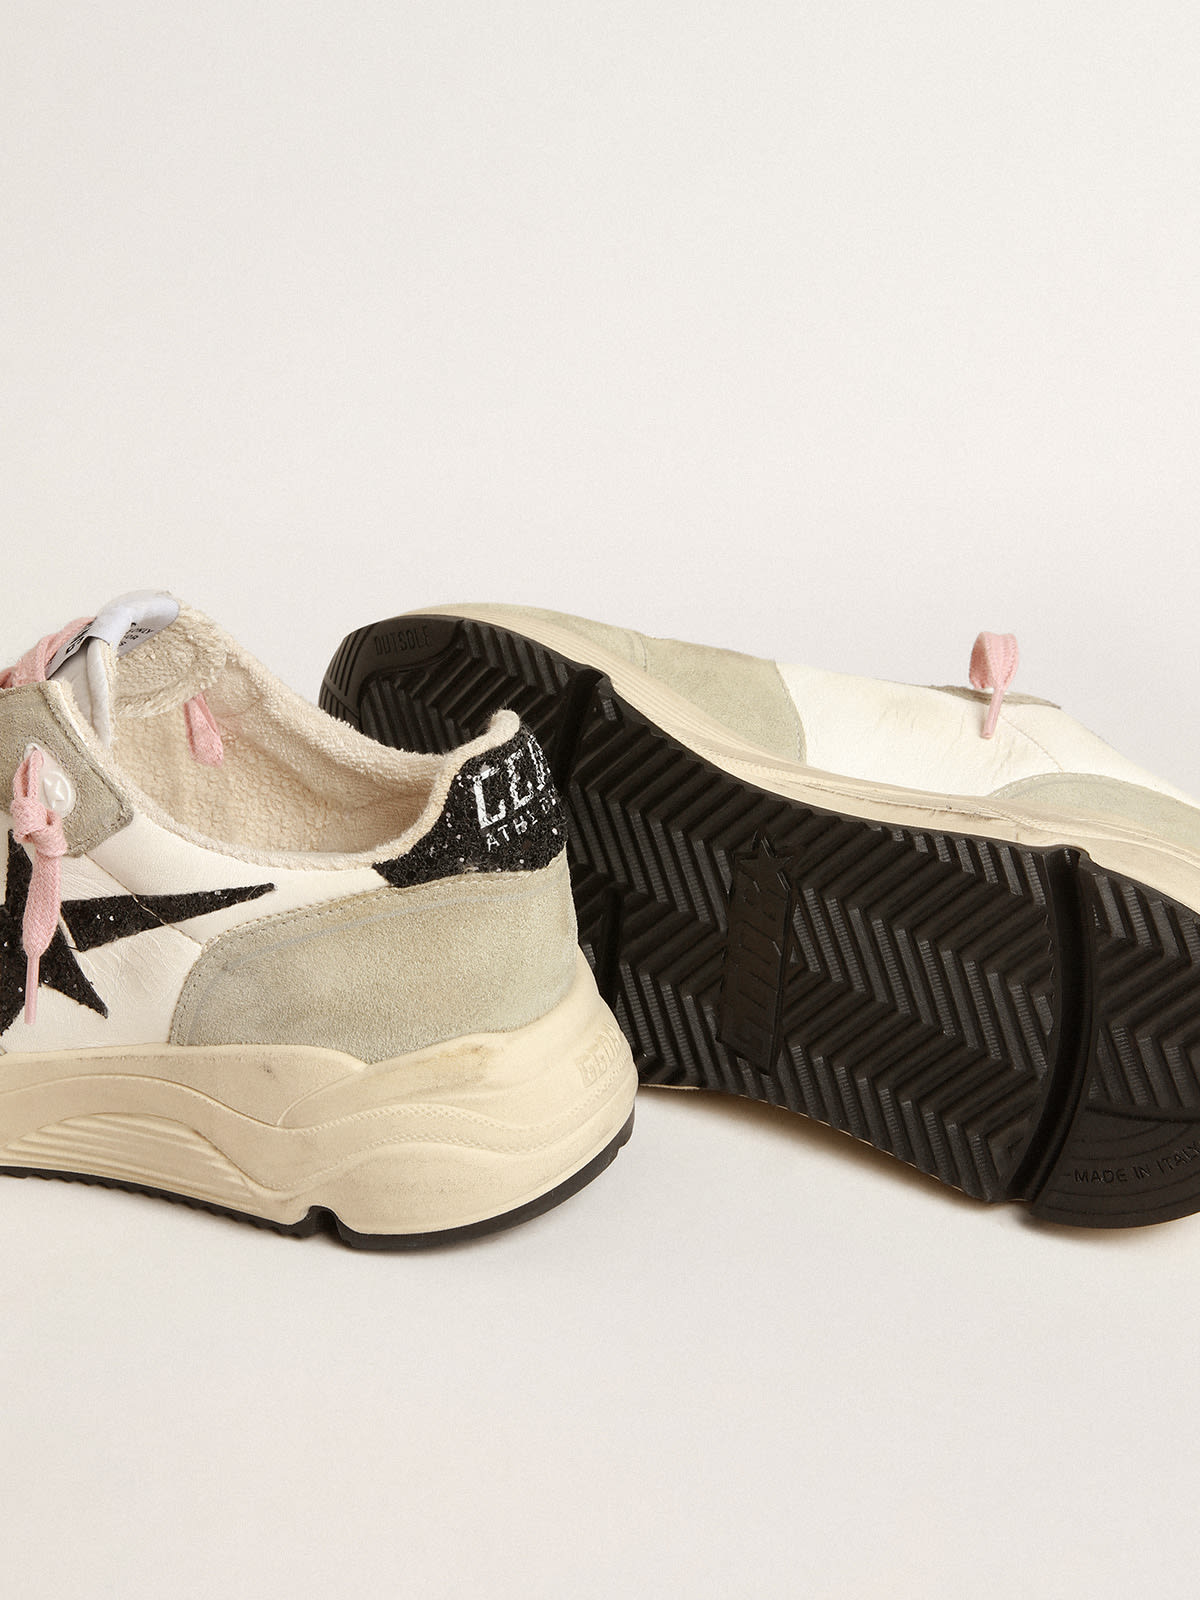 Golden Goose - Running Sole with gray suede inserts and black glitter star in 